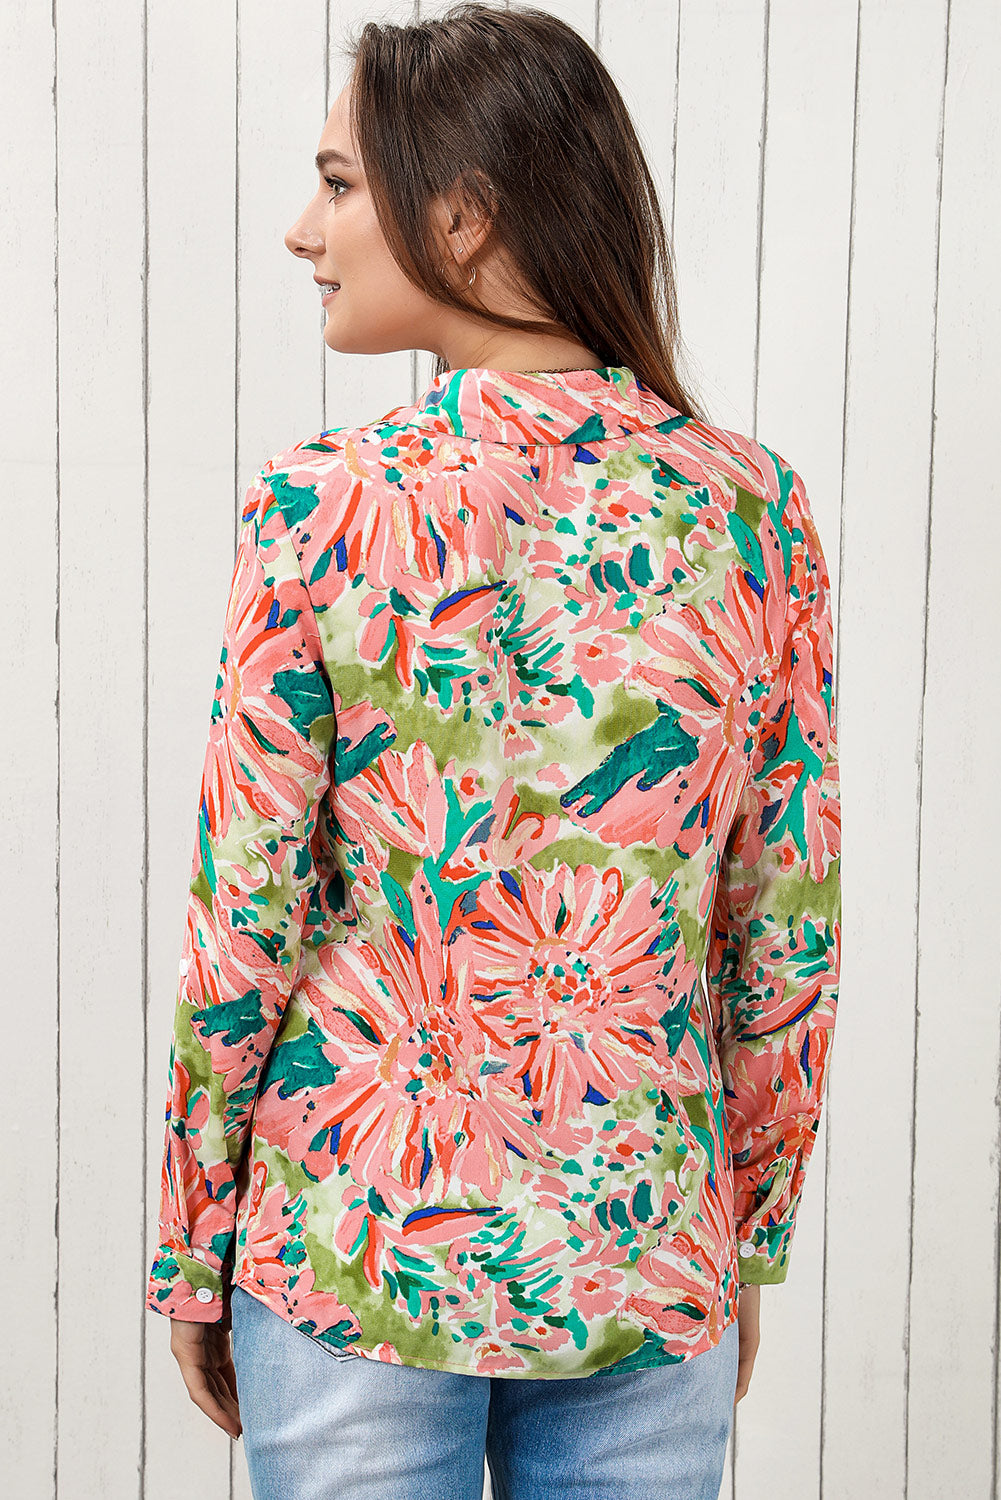 Double Take Floral Long Sleeve Collared Shirt